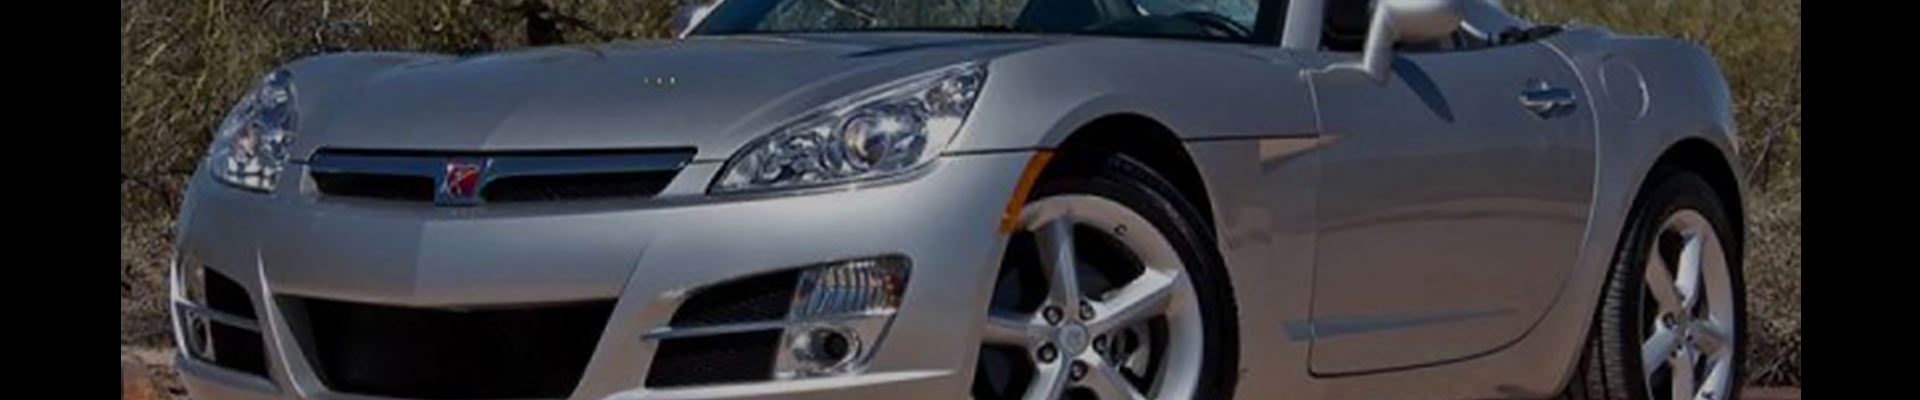 Shop Replacement and OEM Saturn Sky Parts with Discounted Price on the Net